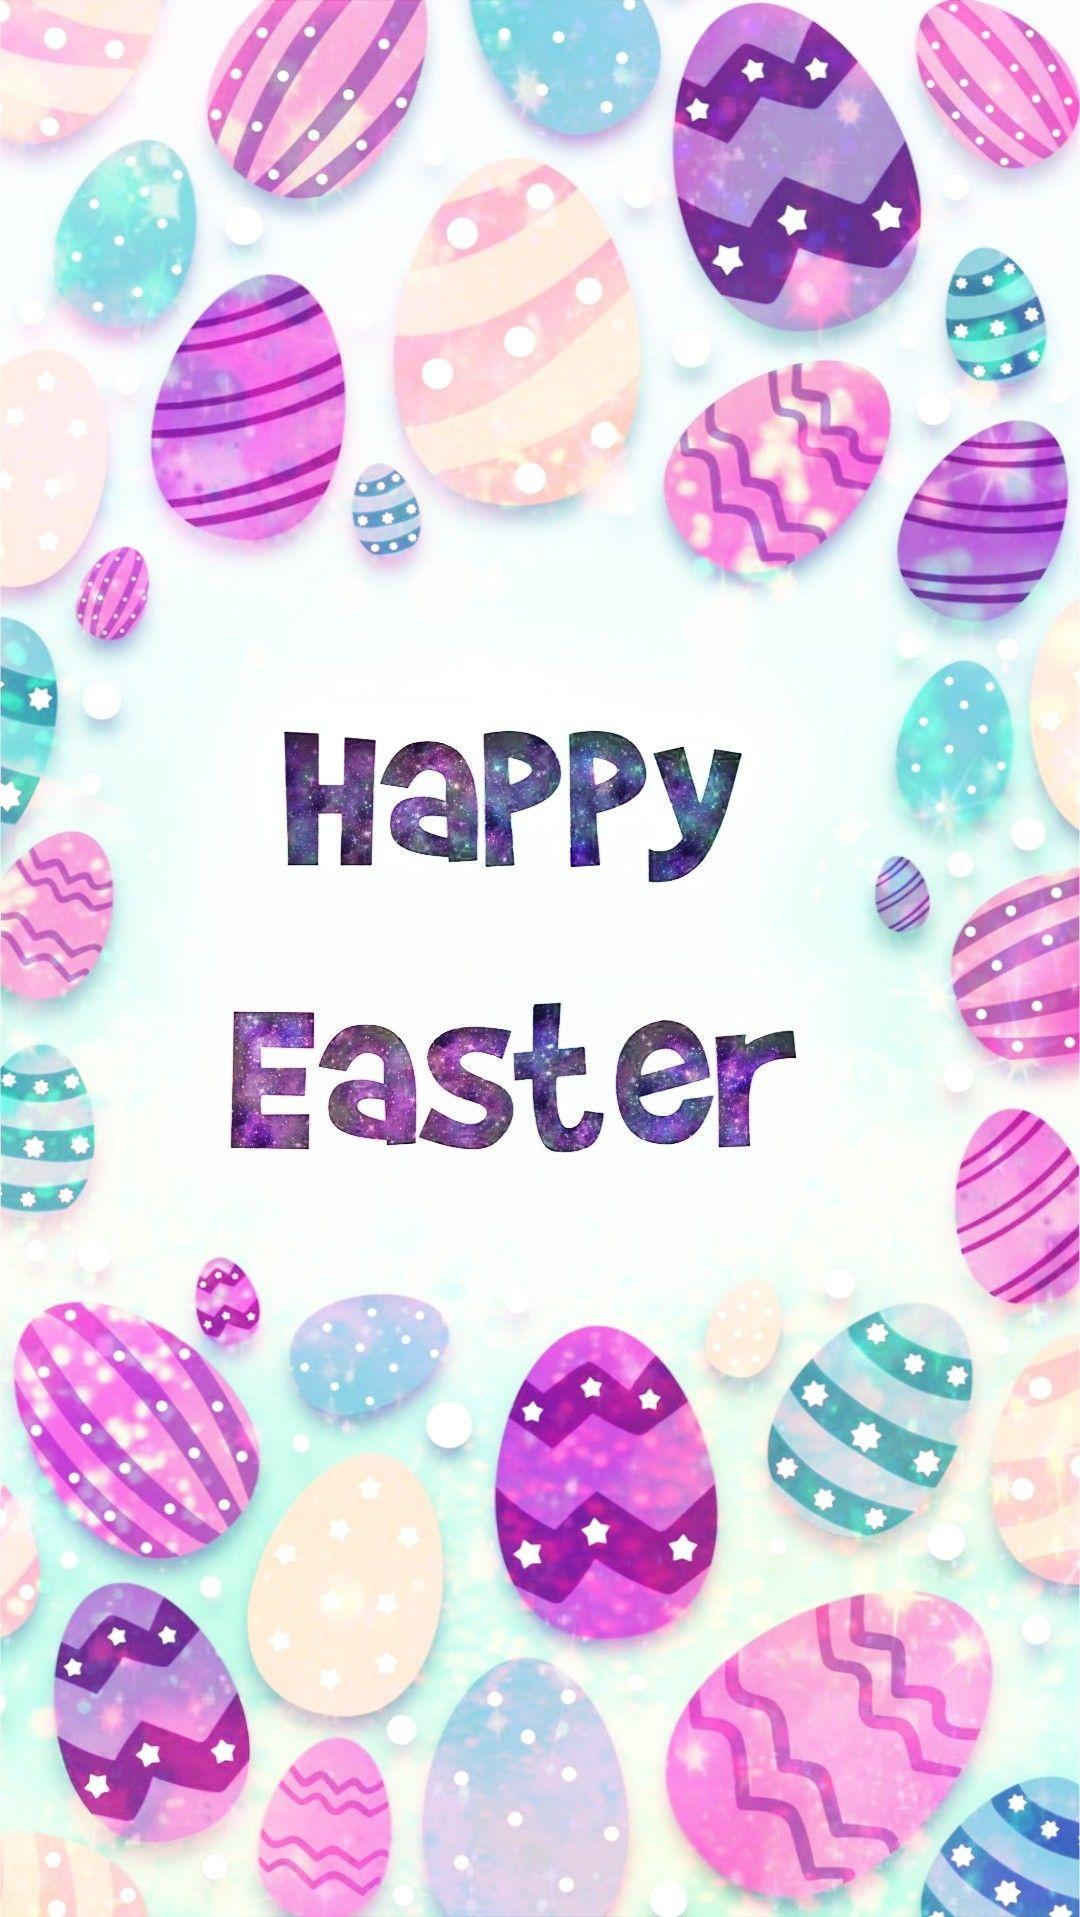 Glittery Happy Easter, made by me #patterns #purple #glitter #sparkles #galaxy #wallpaper #backg. Easter wallpaper, Wallpaper glitter, Wallpaper iphone christmas